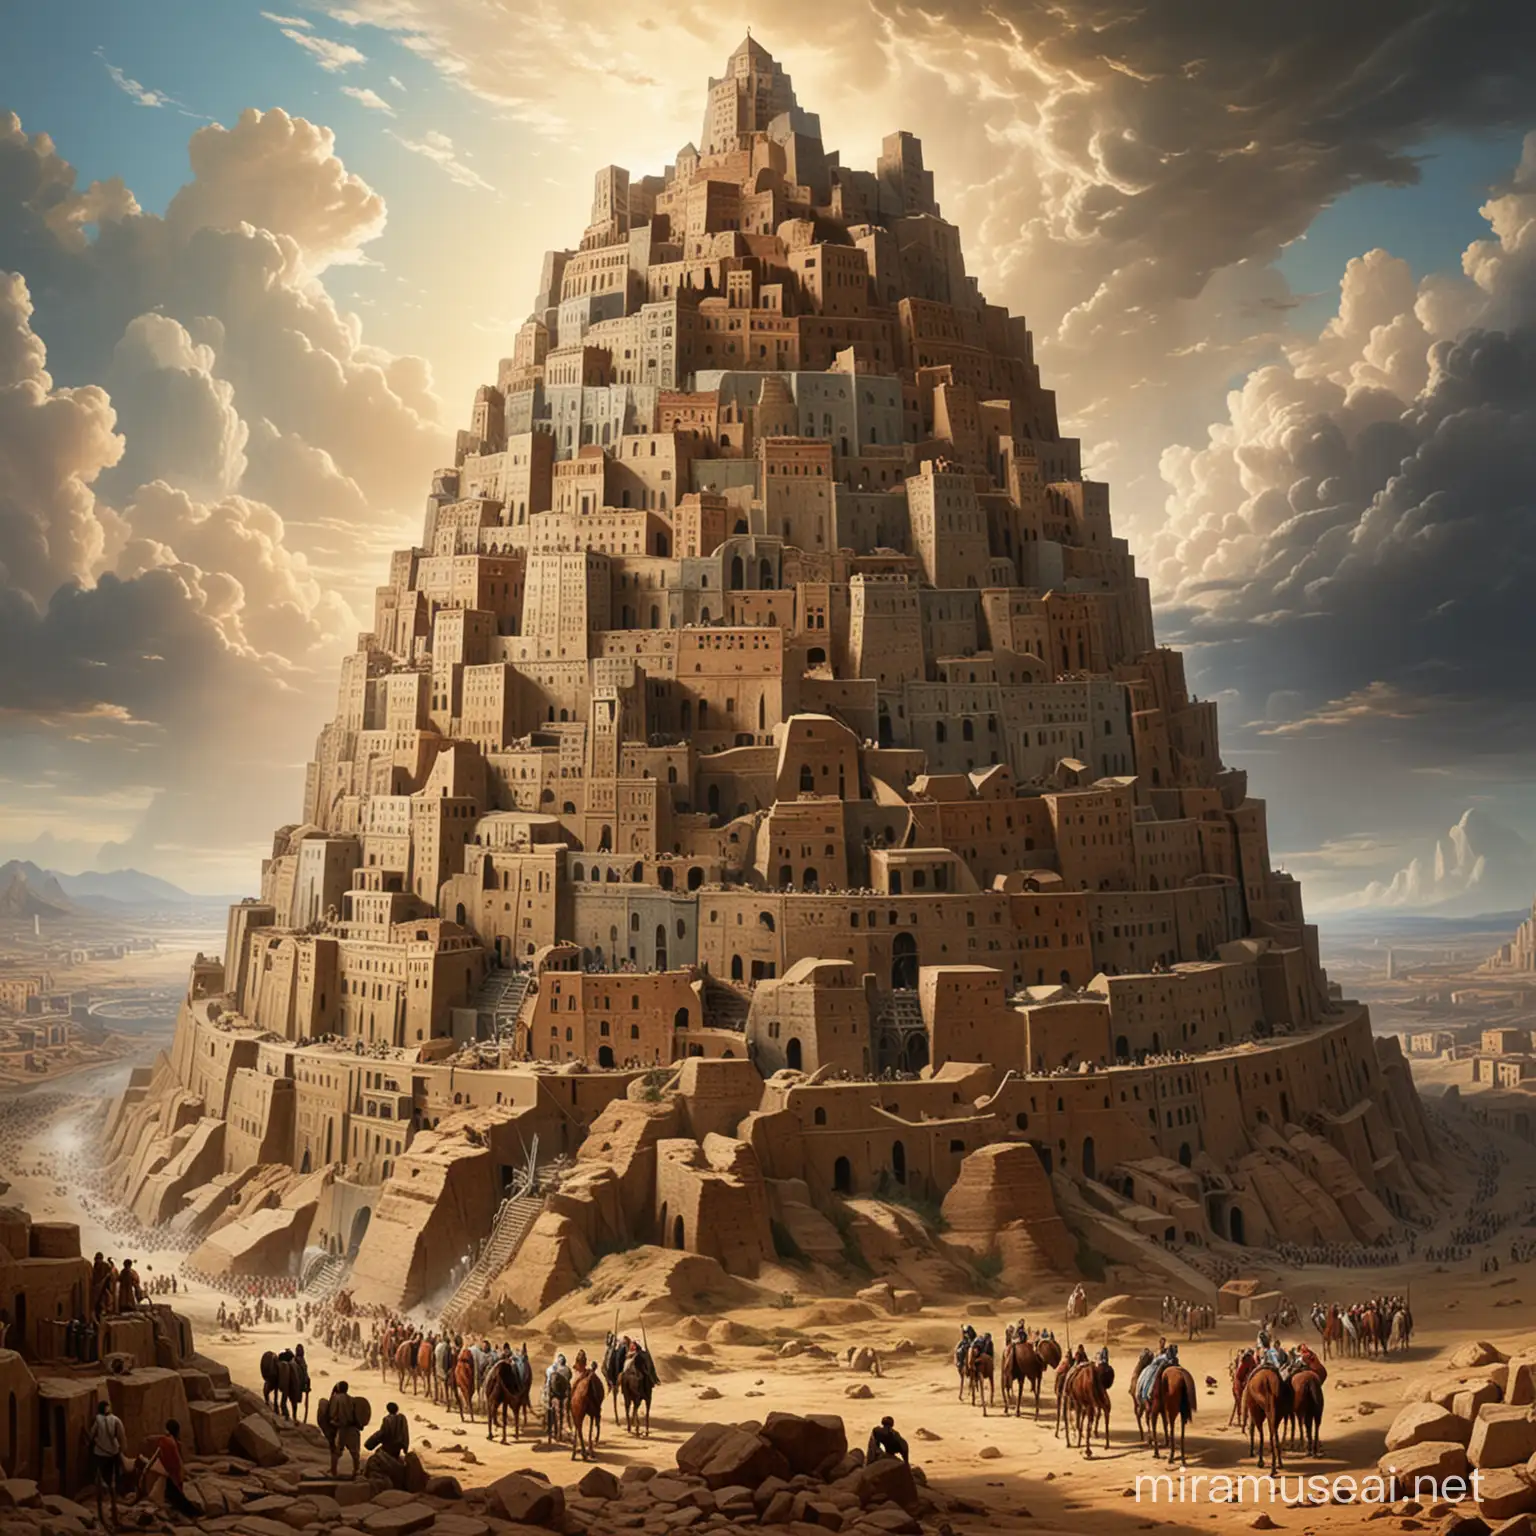 Create the tower of babel